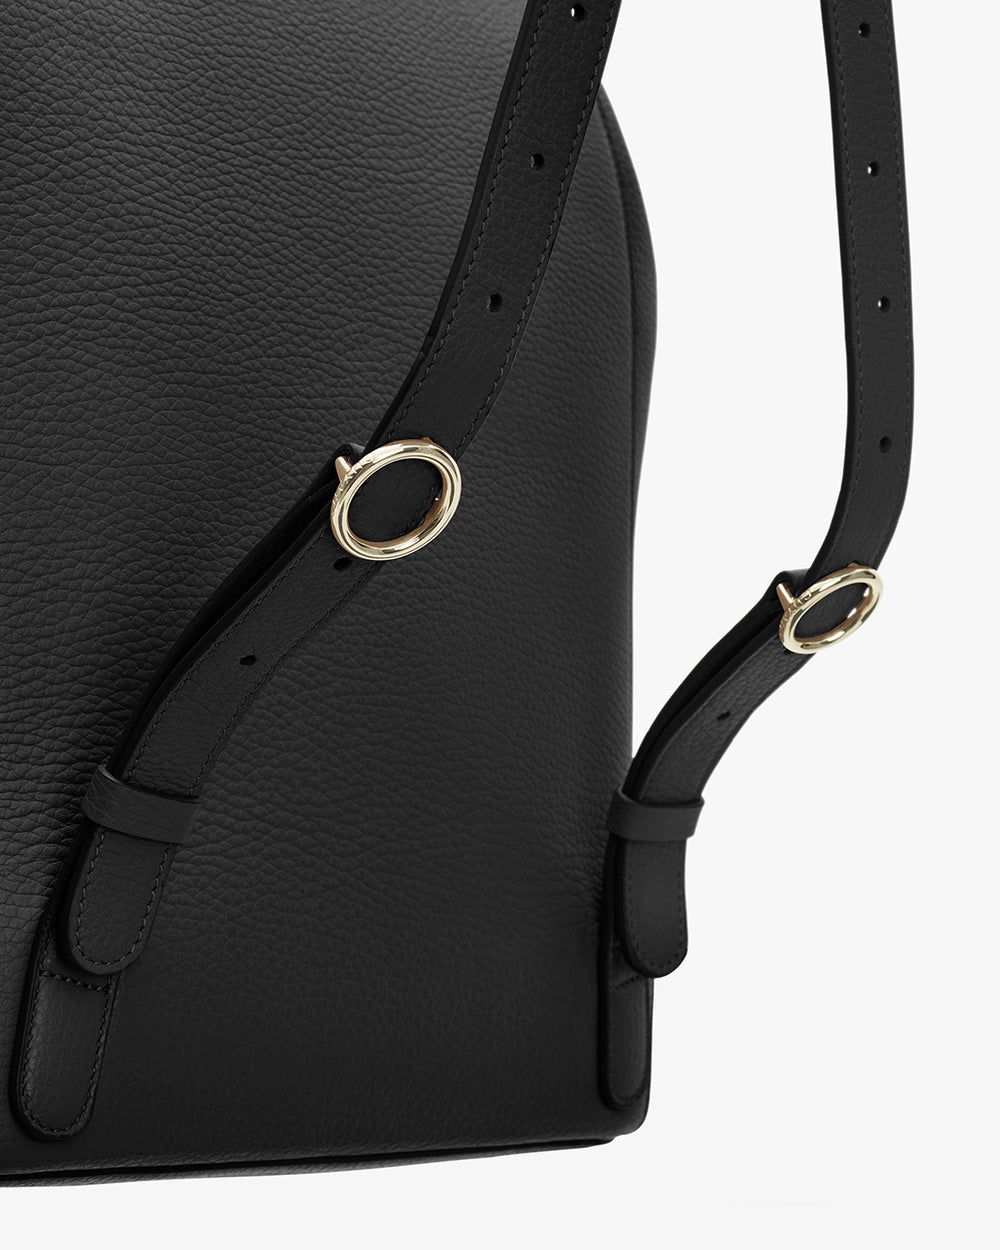 Close-up of a bag with adjustable strap and metal rings.